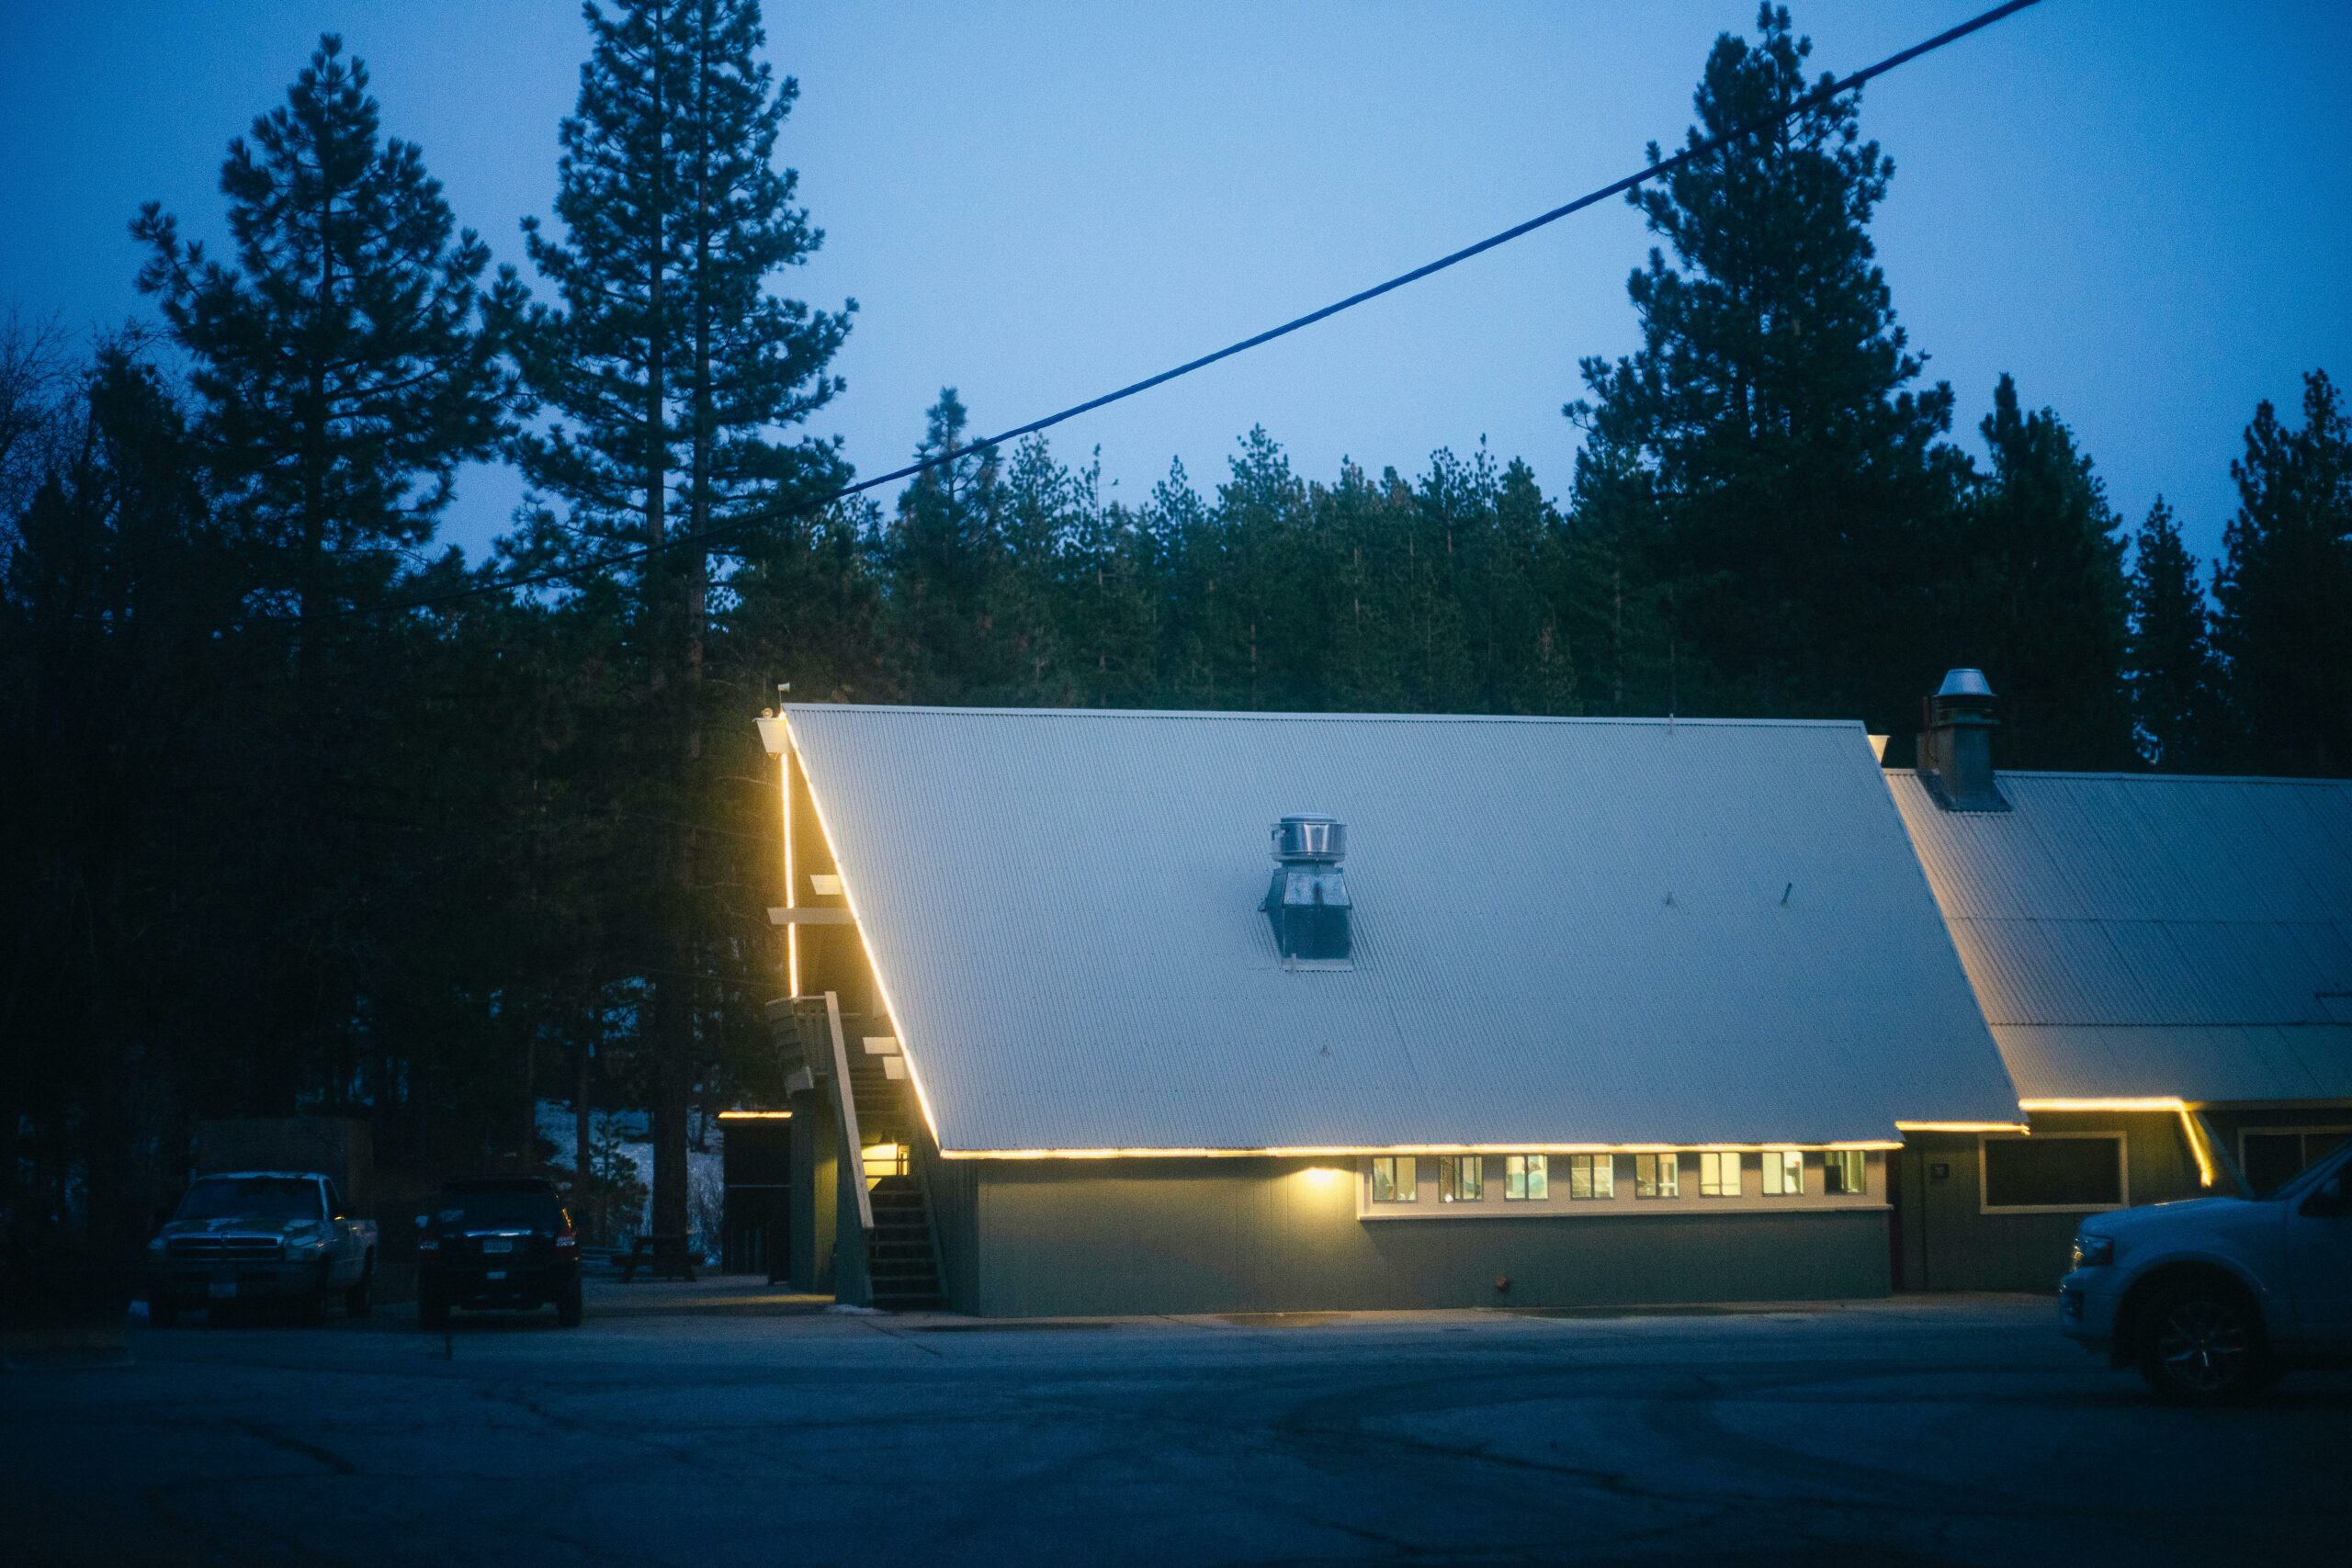 A large building with a steep A-frame roof is lit with warm, glowing lights outlining its structure. The building is surrounded by tall pine trees and a clear, darkening sky. Several vehicles are parked near the building, and the overall scene gives a cozy, inviting ambiance.